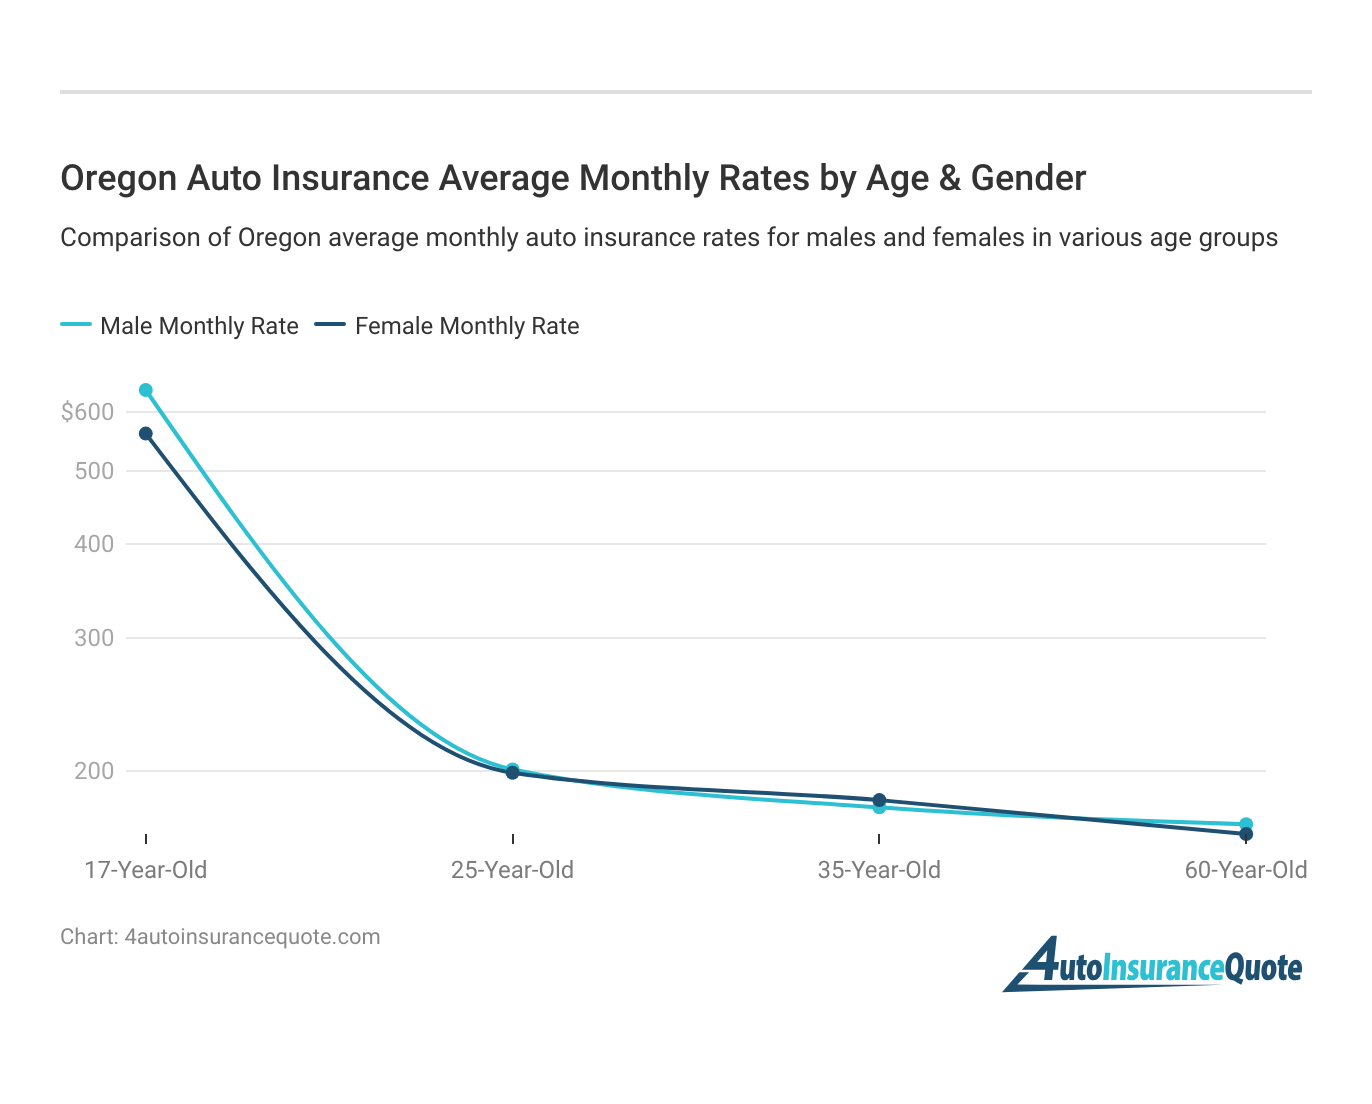 <h3>Oregon Auto Insurance Average Monthly Rates by Age & Gender</h3>